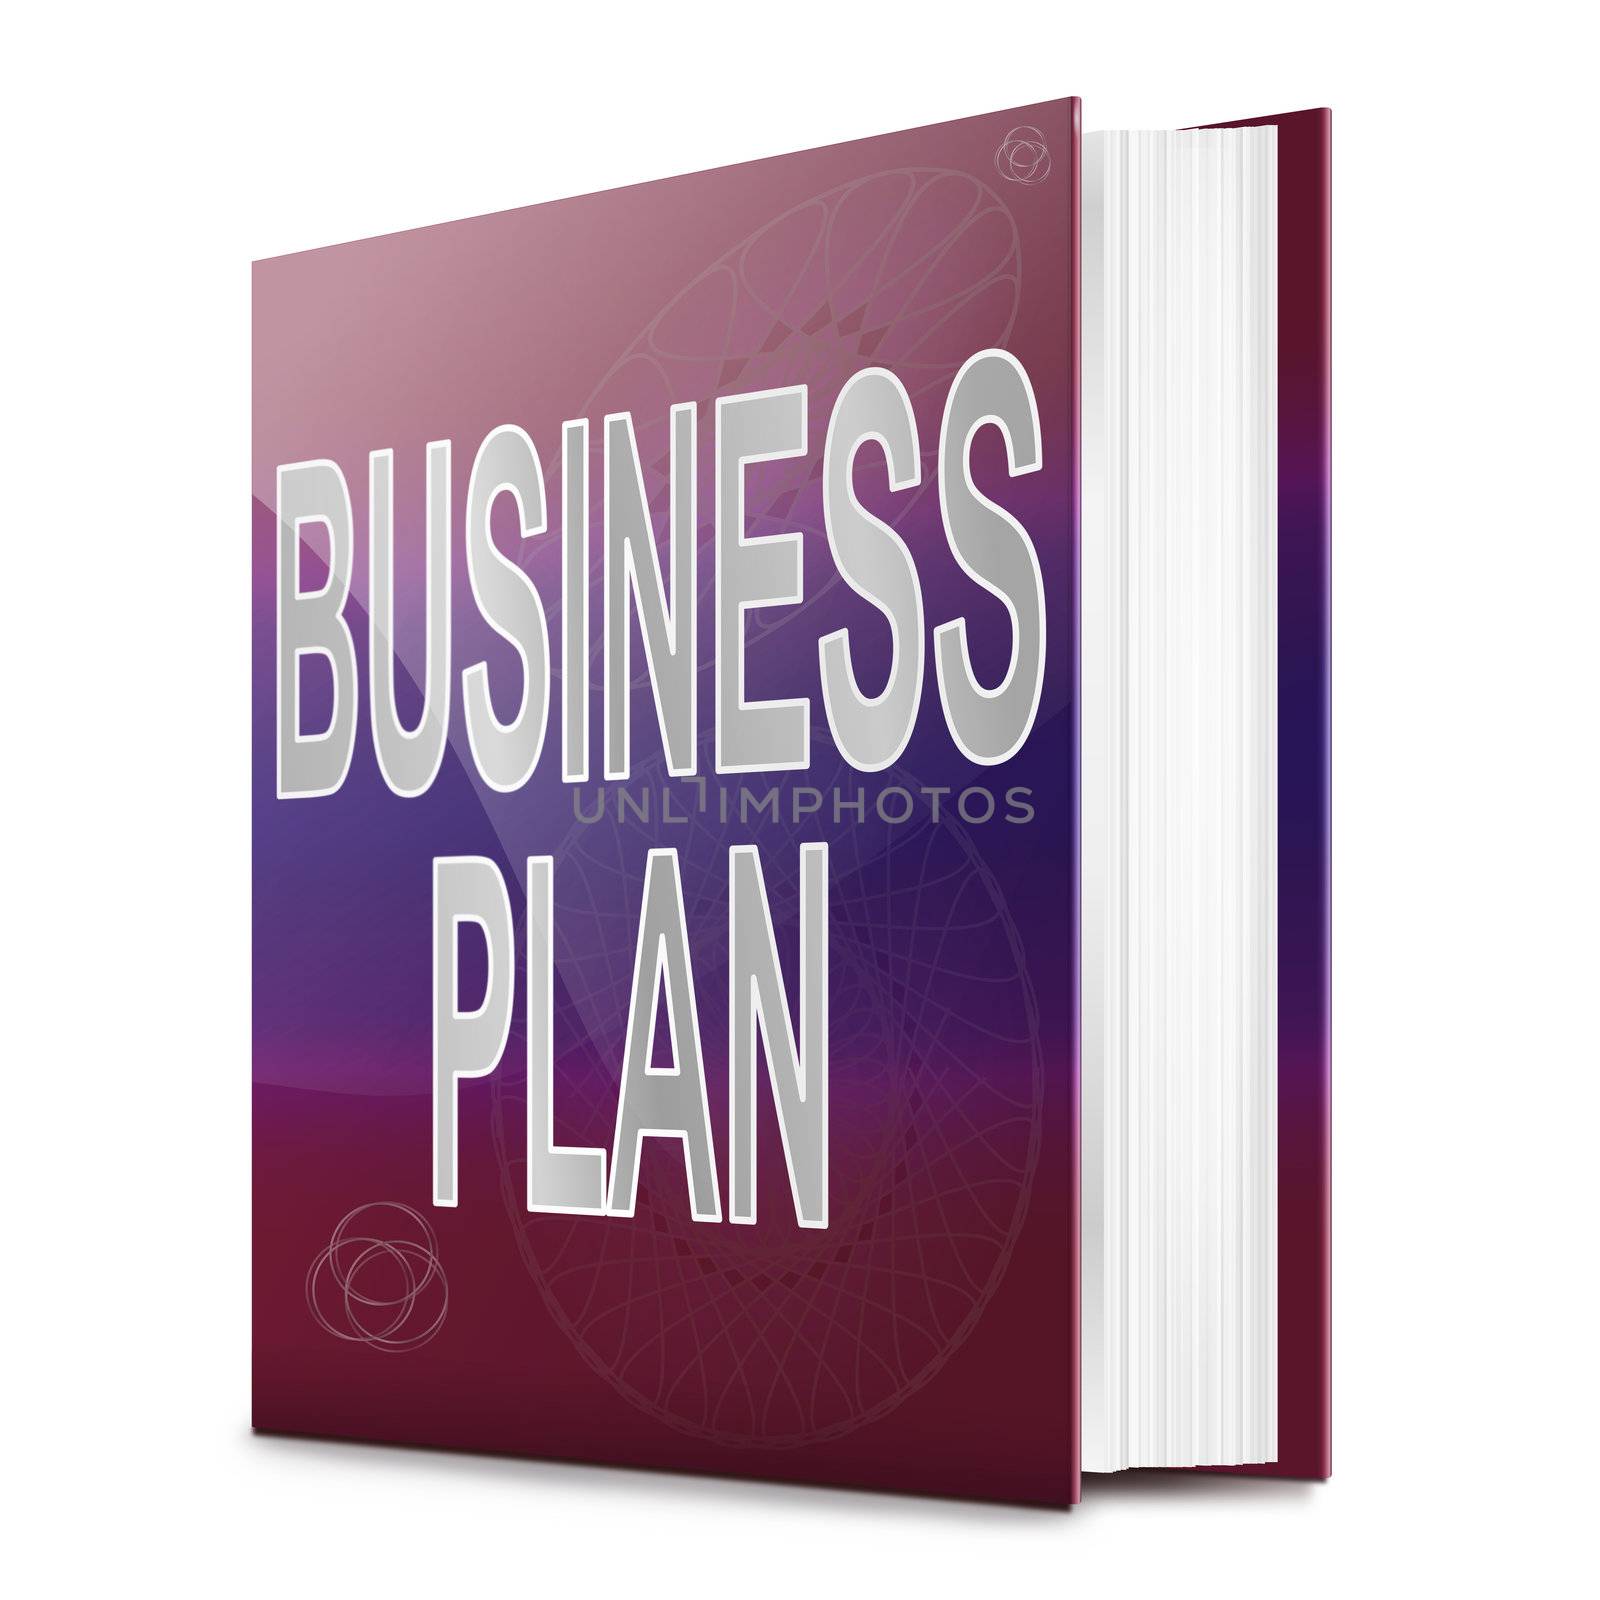 Illustration depicting a book with a business plan concept title. White background.